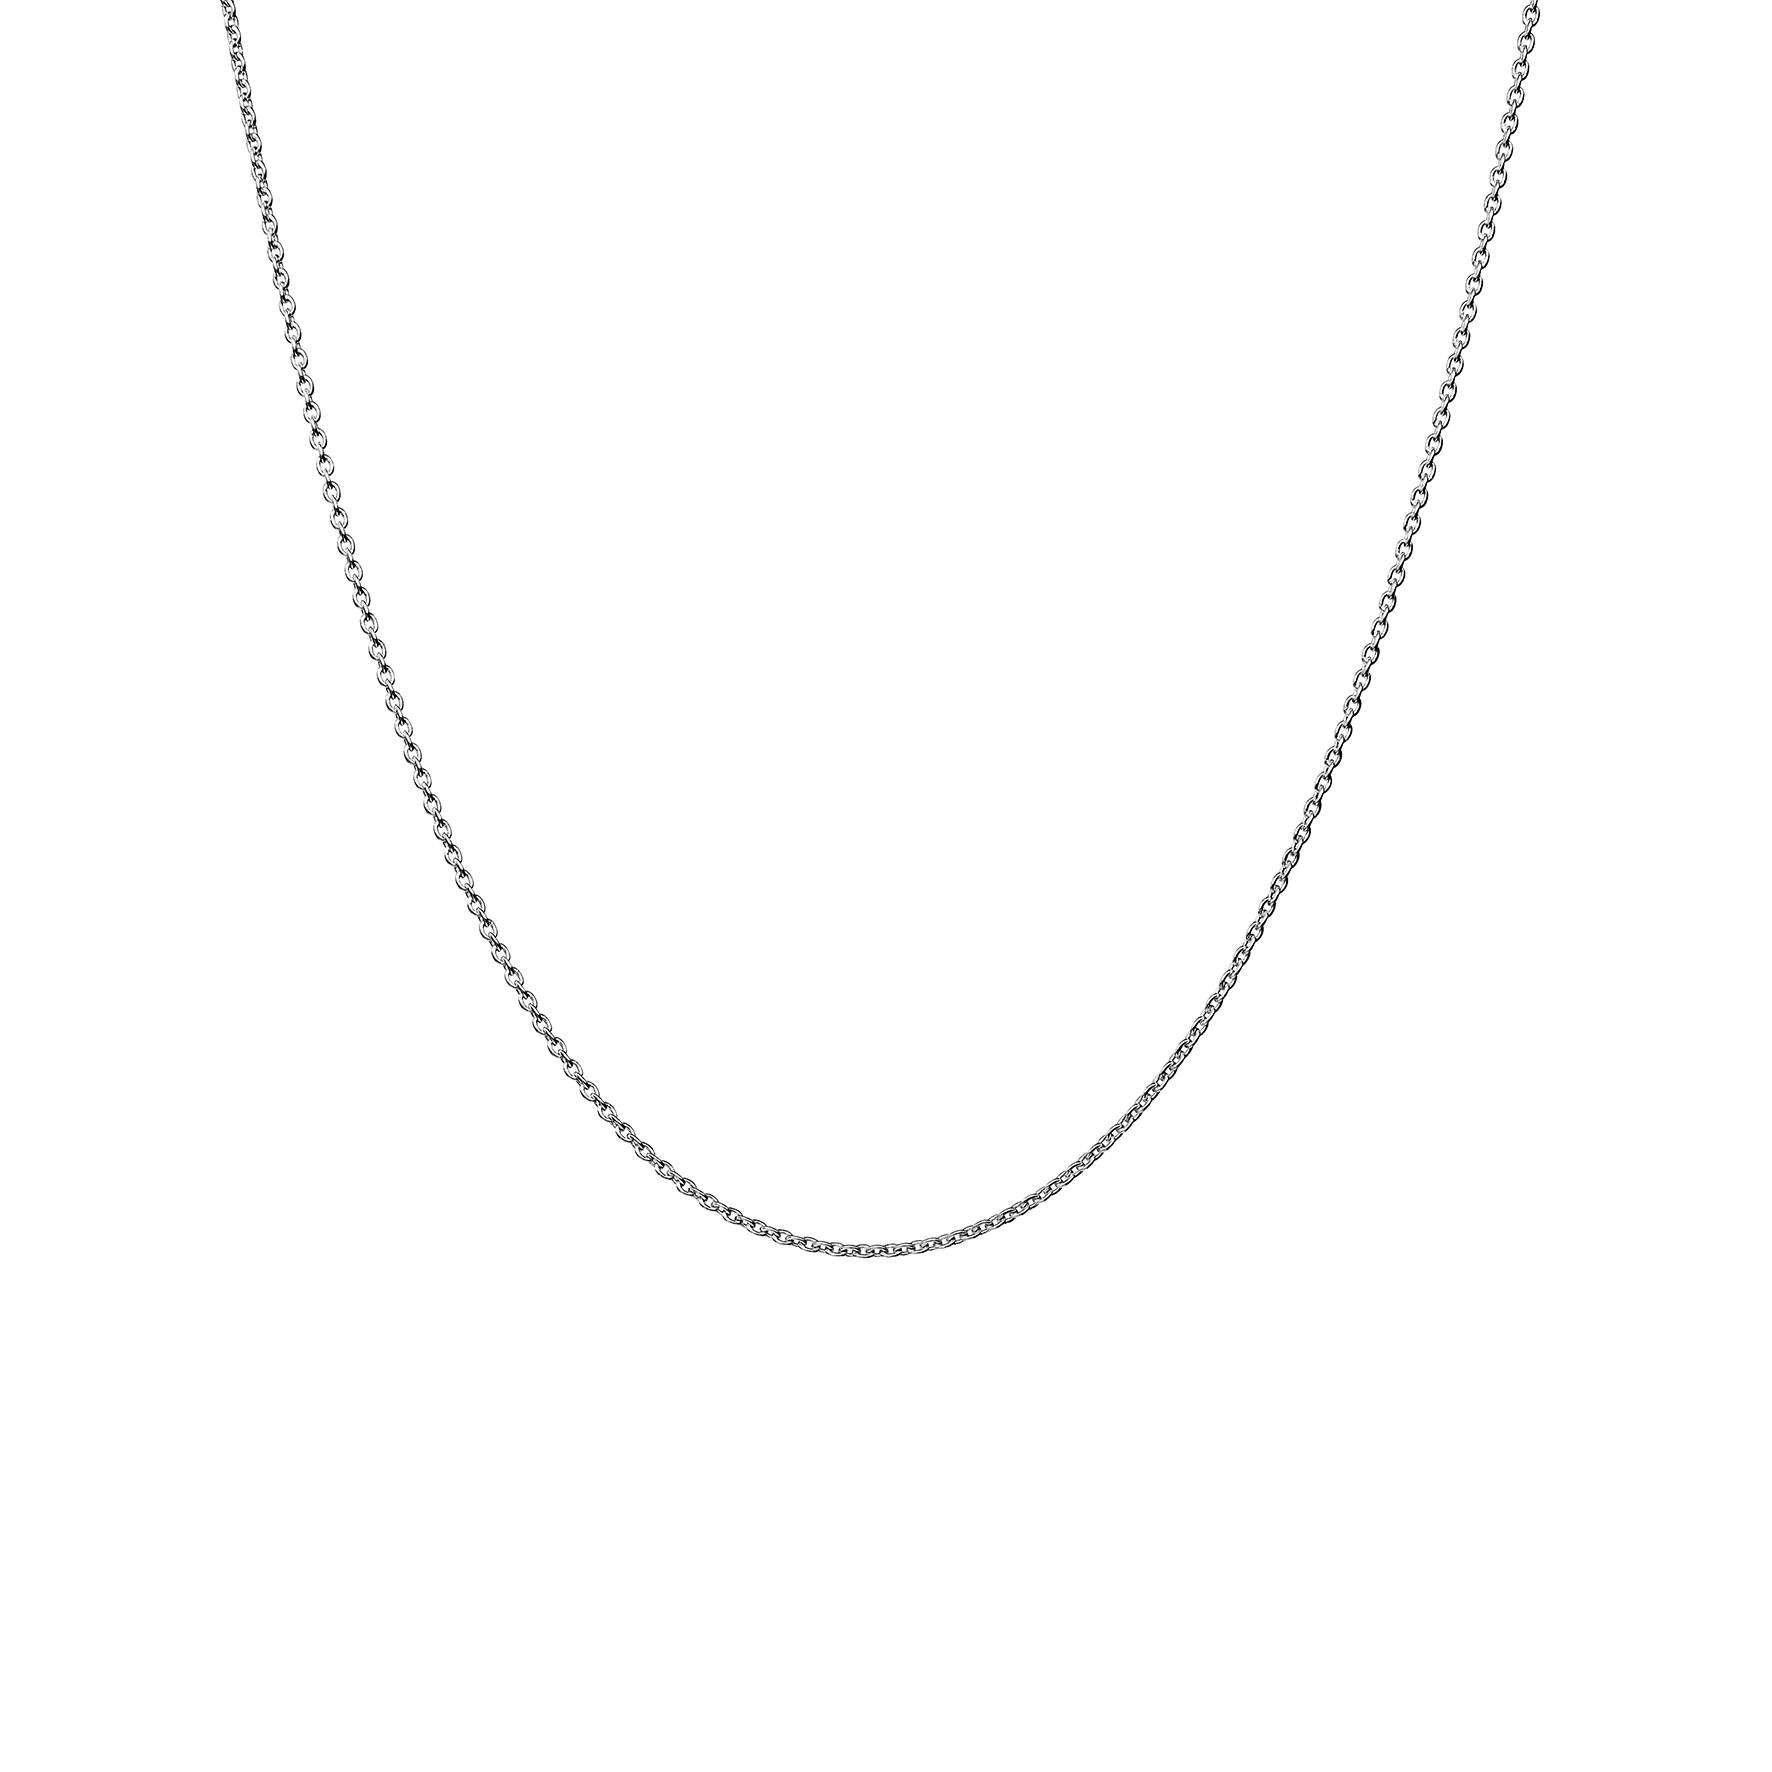 Charlie Medium Necklace from Maanesten in Silver Sterling 925